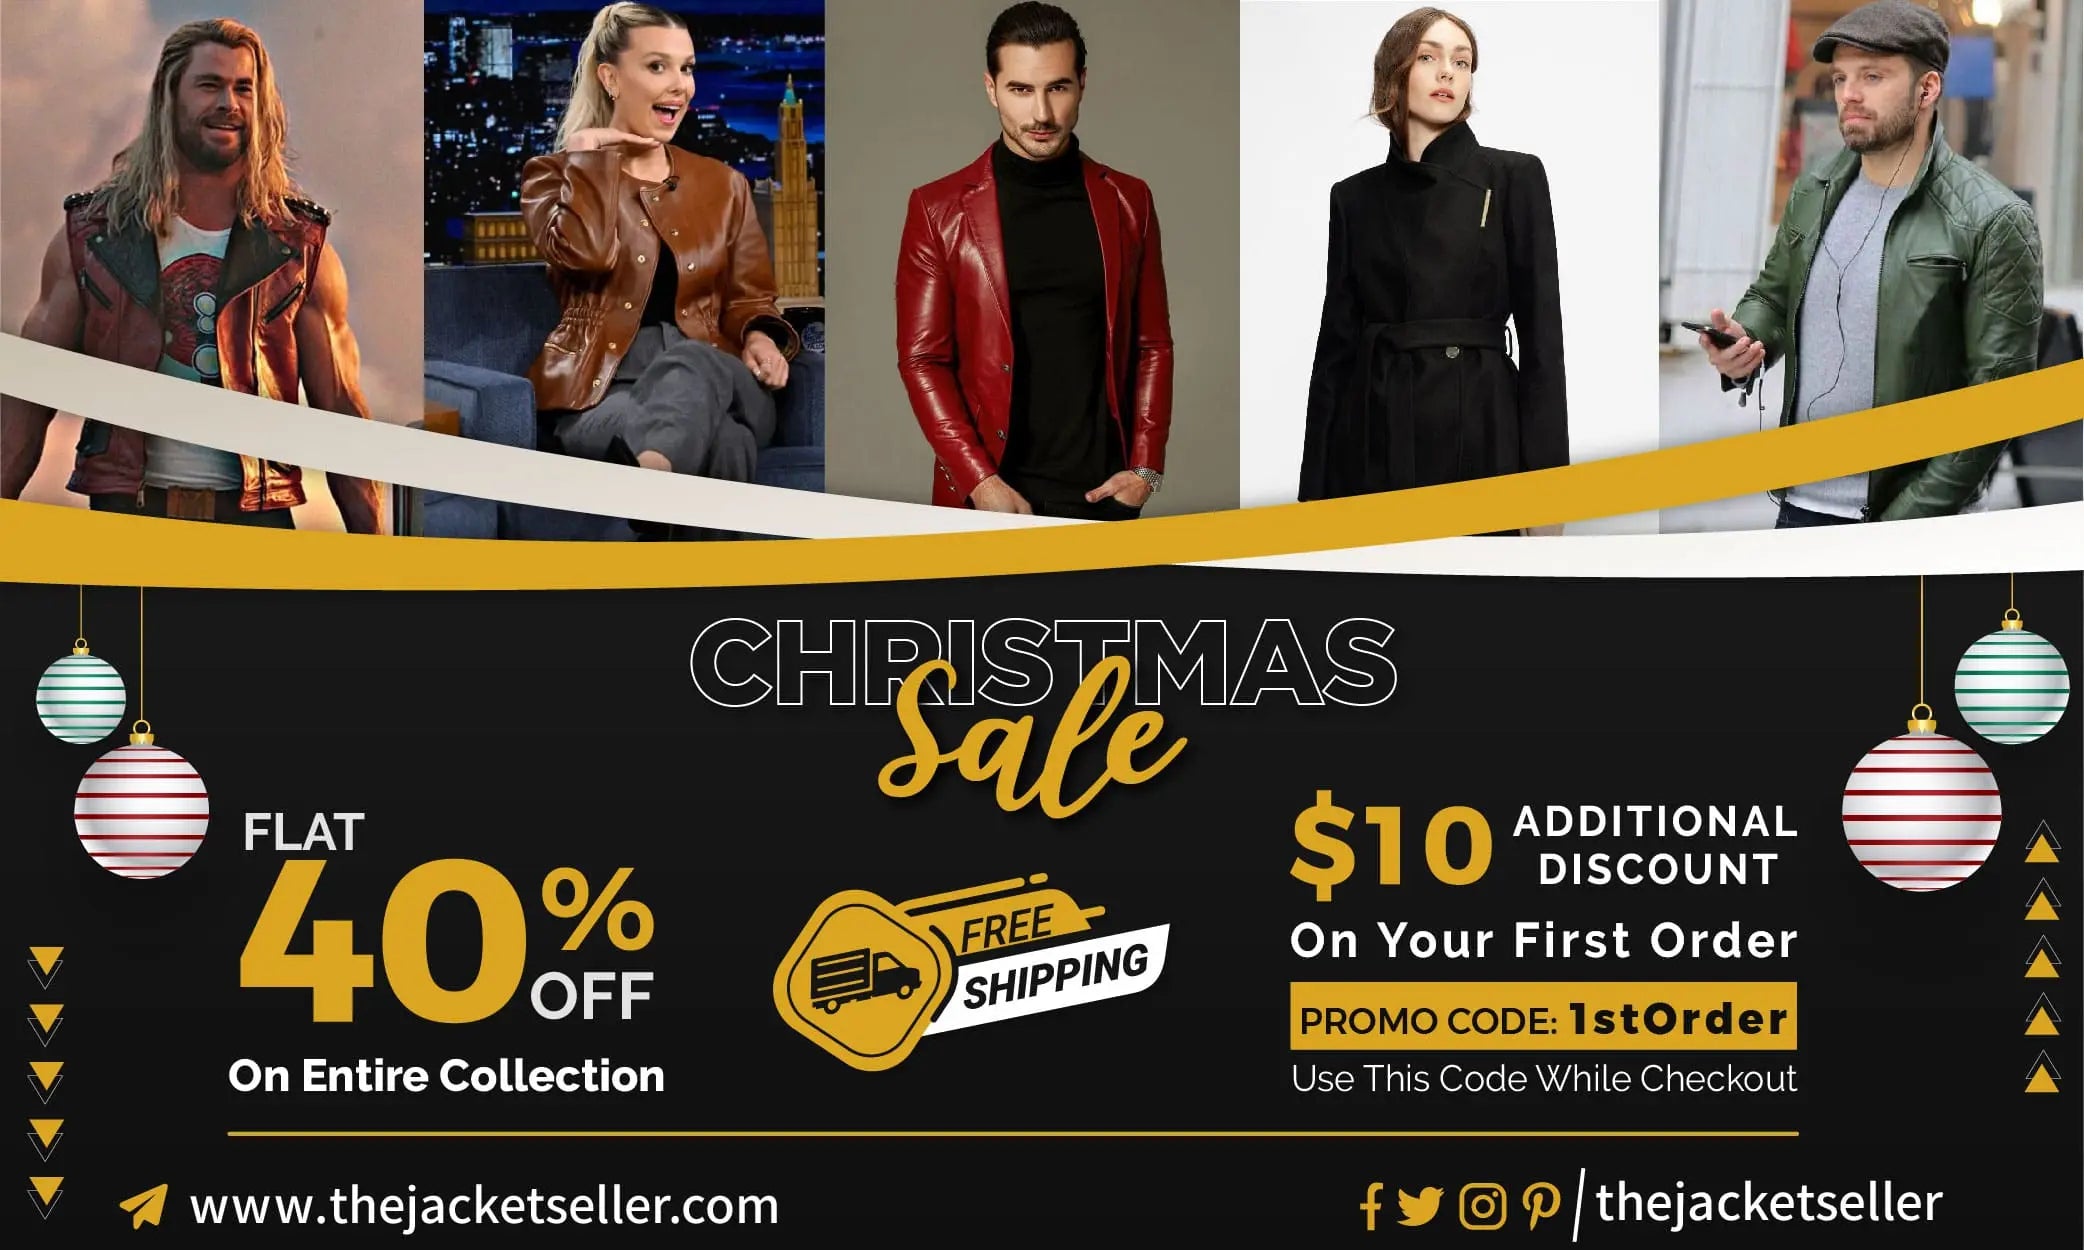 Men, Women and Celebrity Jackets on Christmas Sale